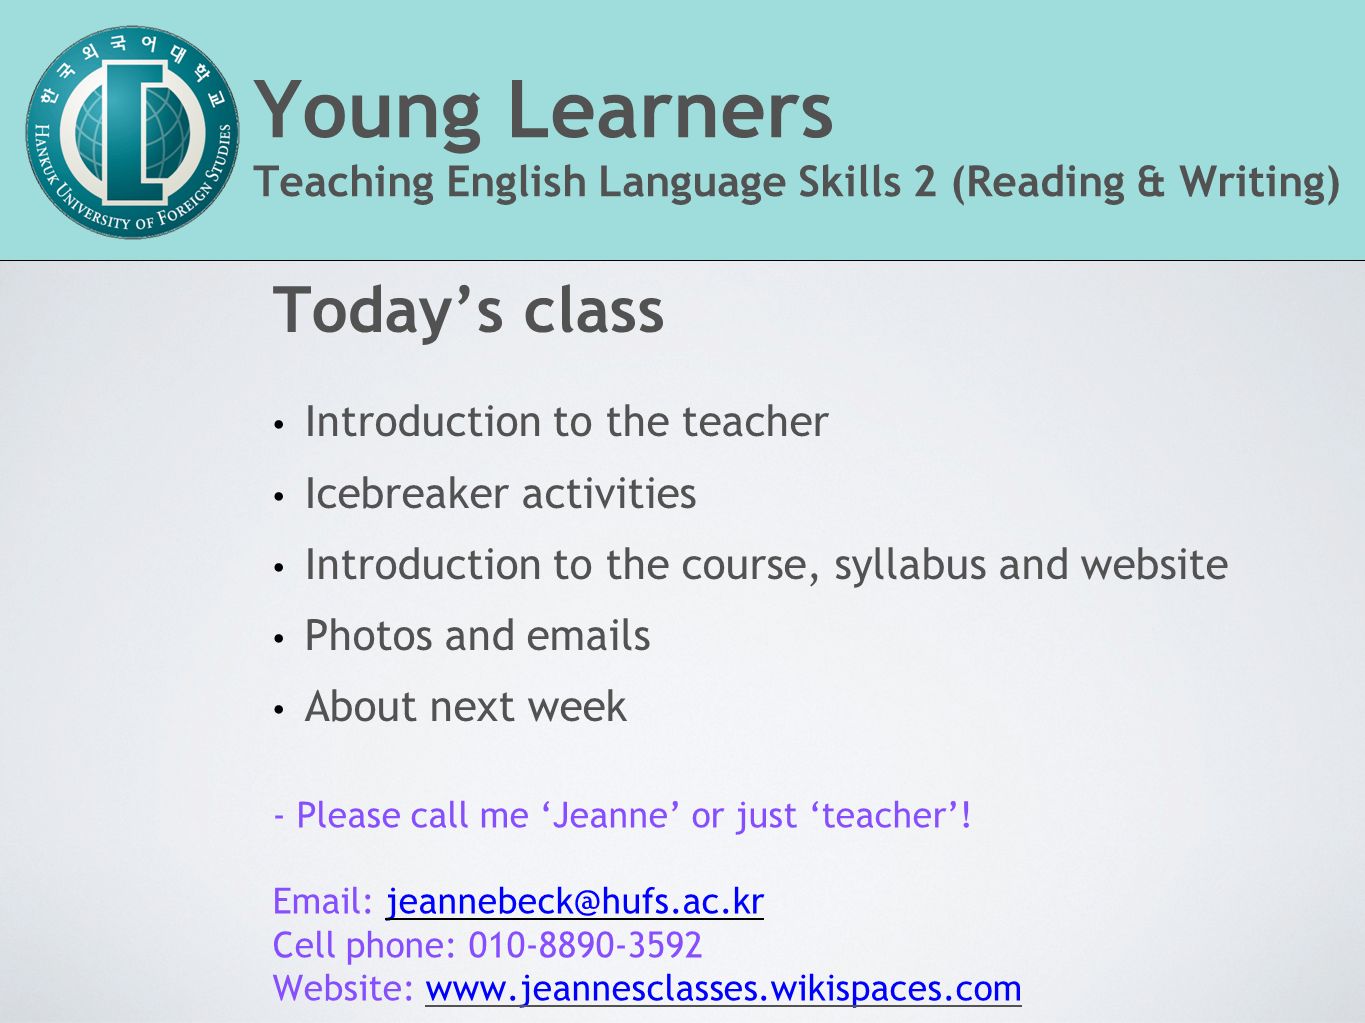 methods of teaching writing and reading for young learners school